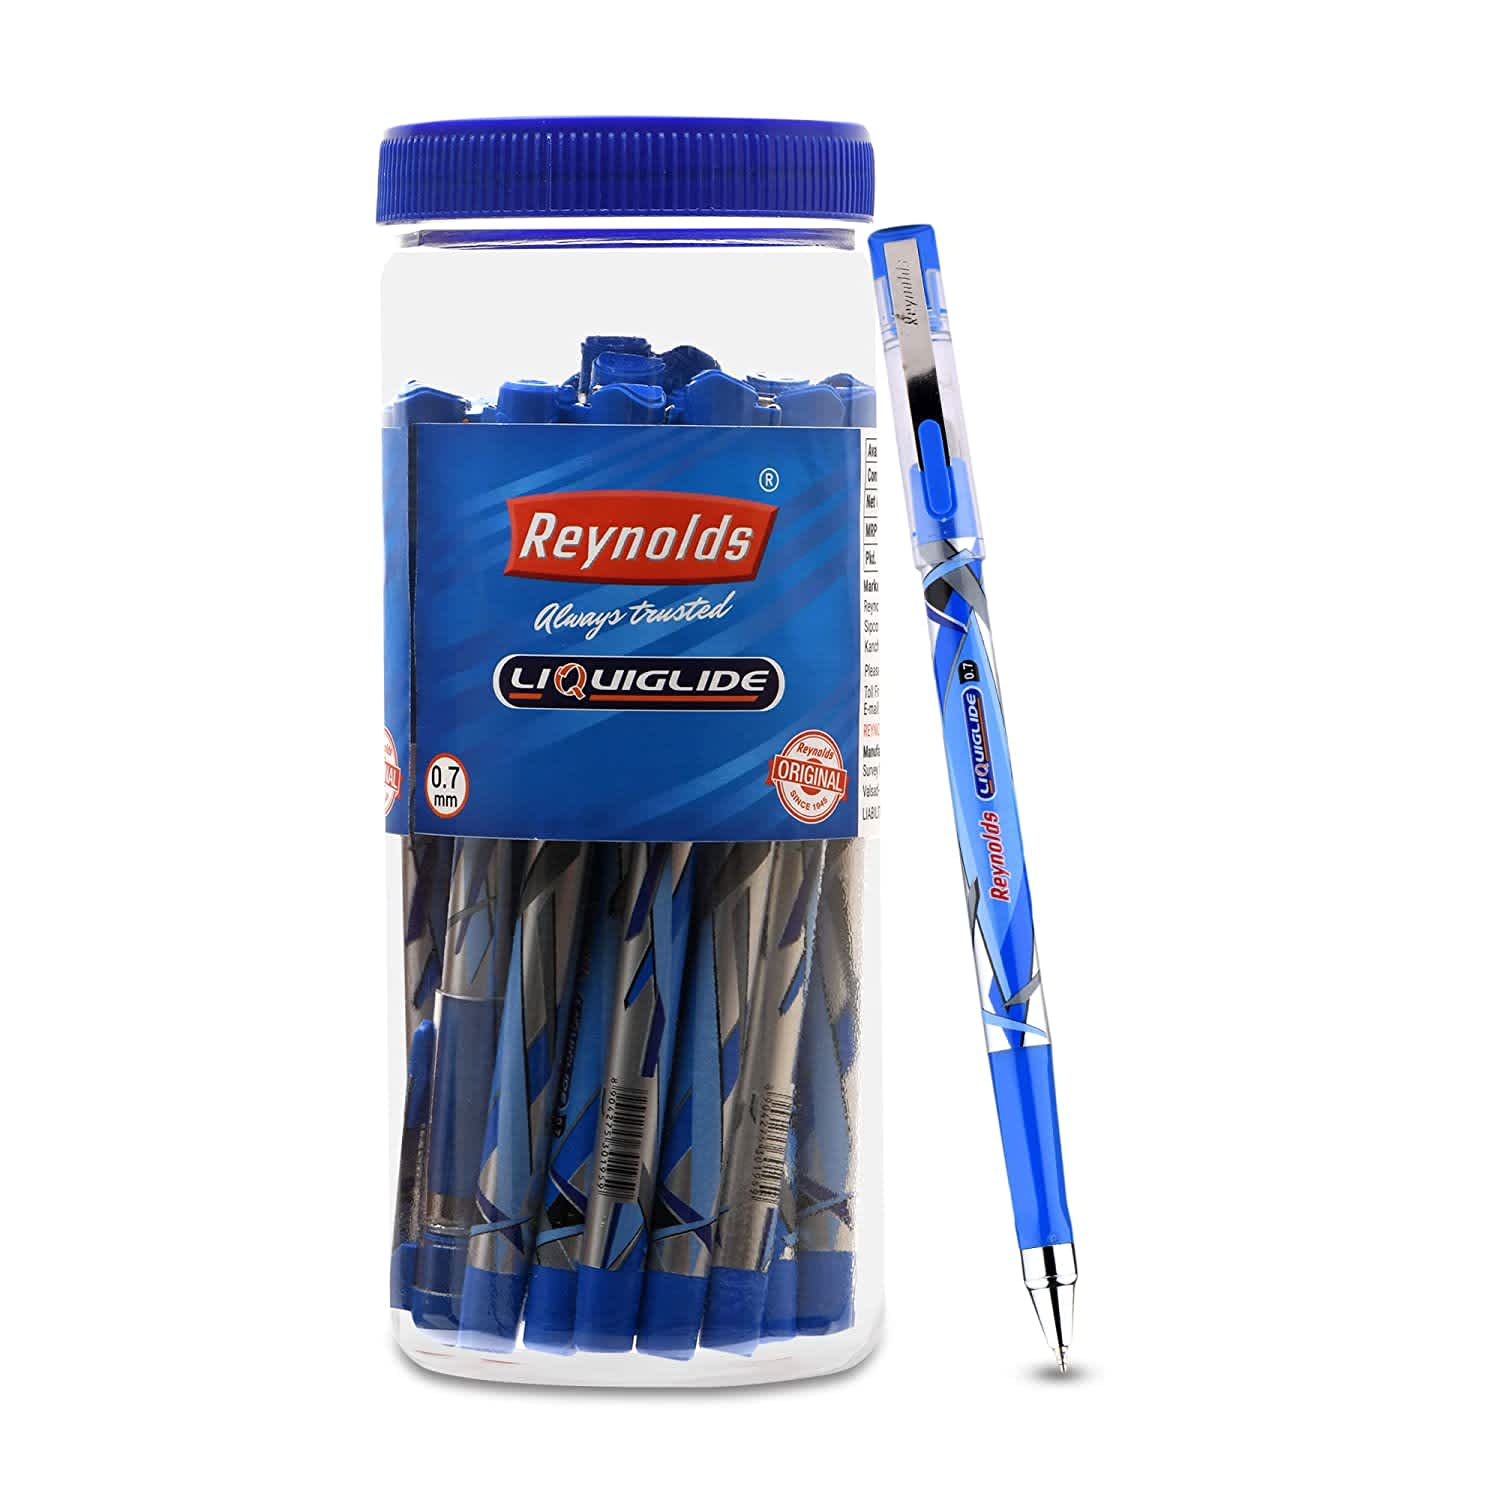 Reynolds LIQUIGLIDE 25 CT JAR BLUE I Lightweight Ball Pen With Comfortable Grip for Extra Smooth Writing I School and Office Stationery | 07mm Tip Size | Pen for BTS